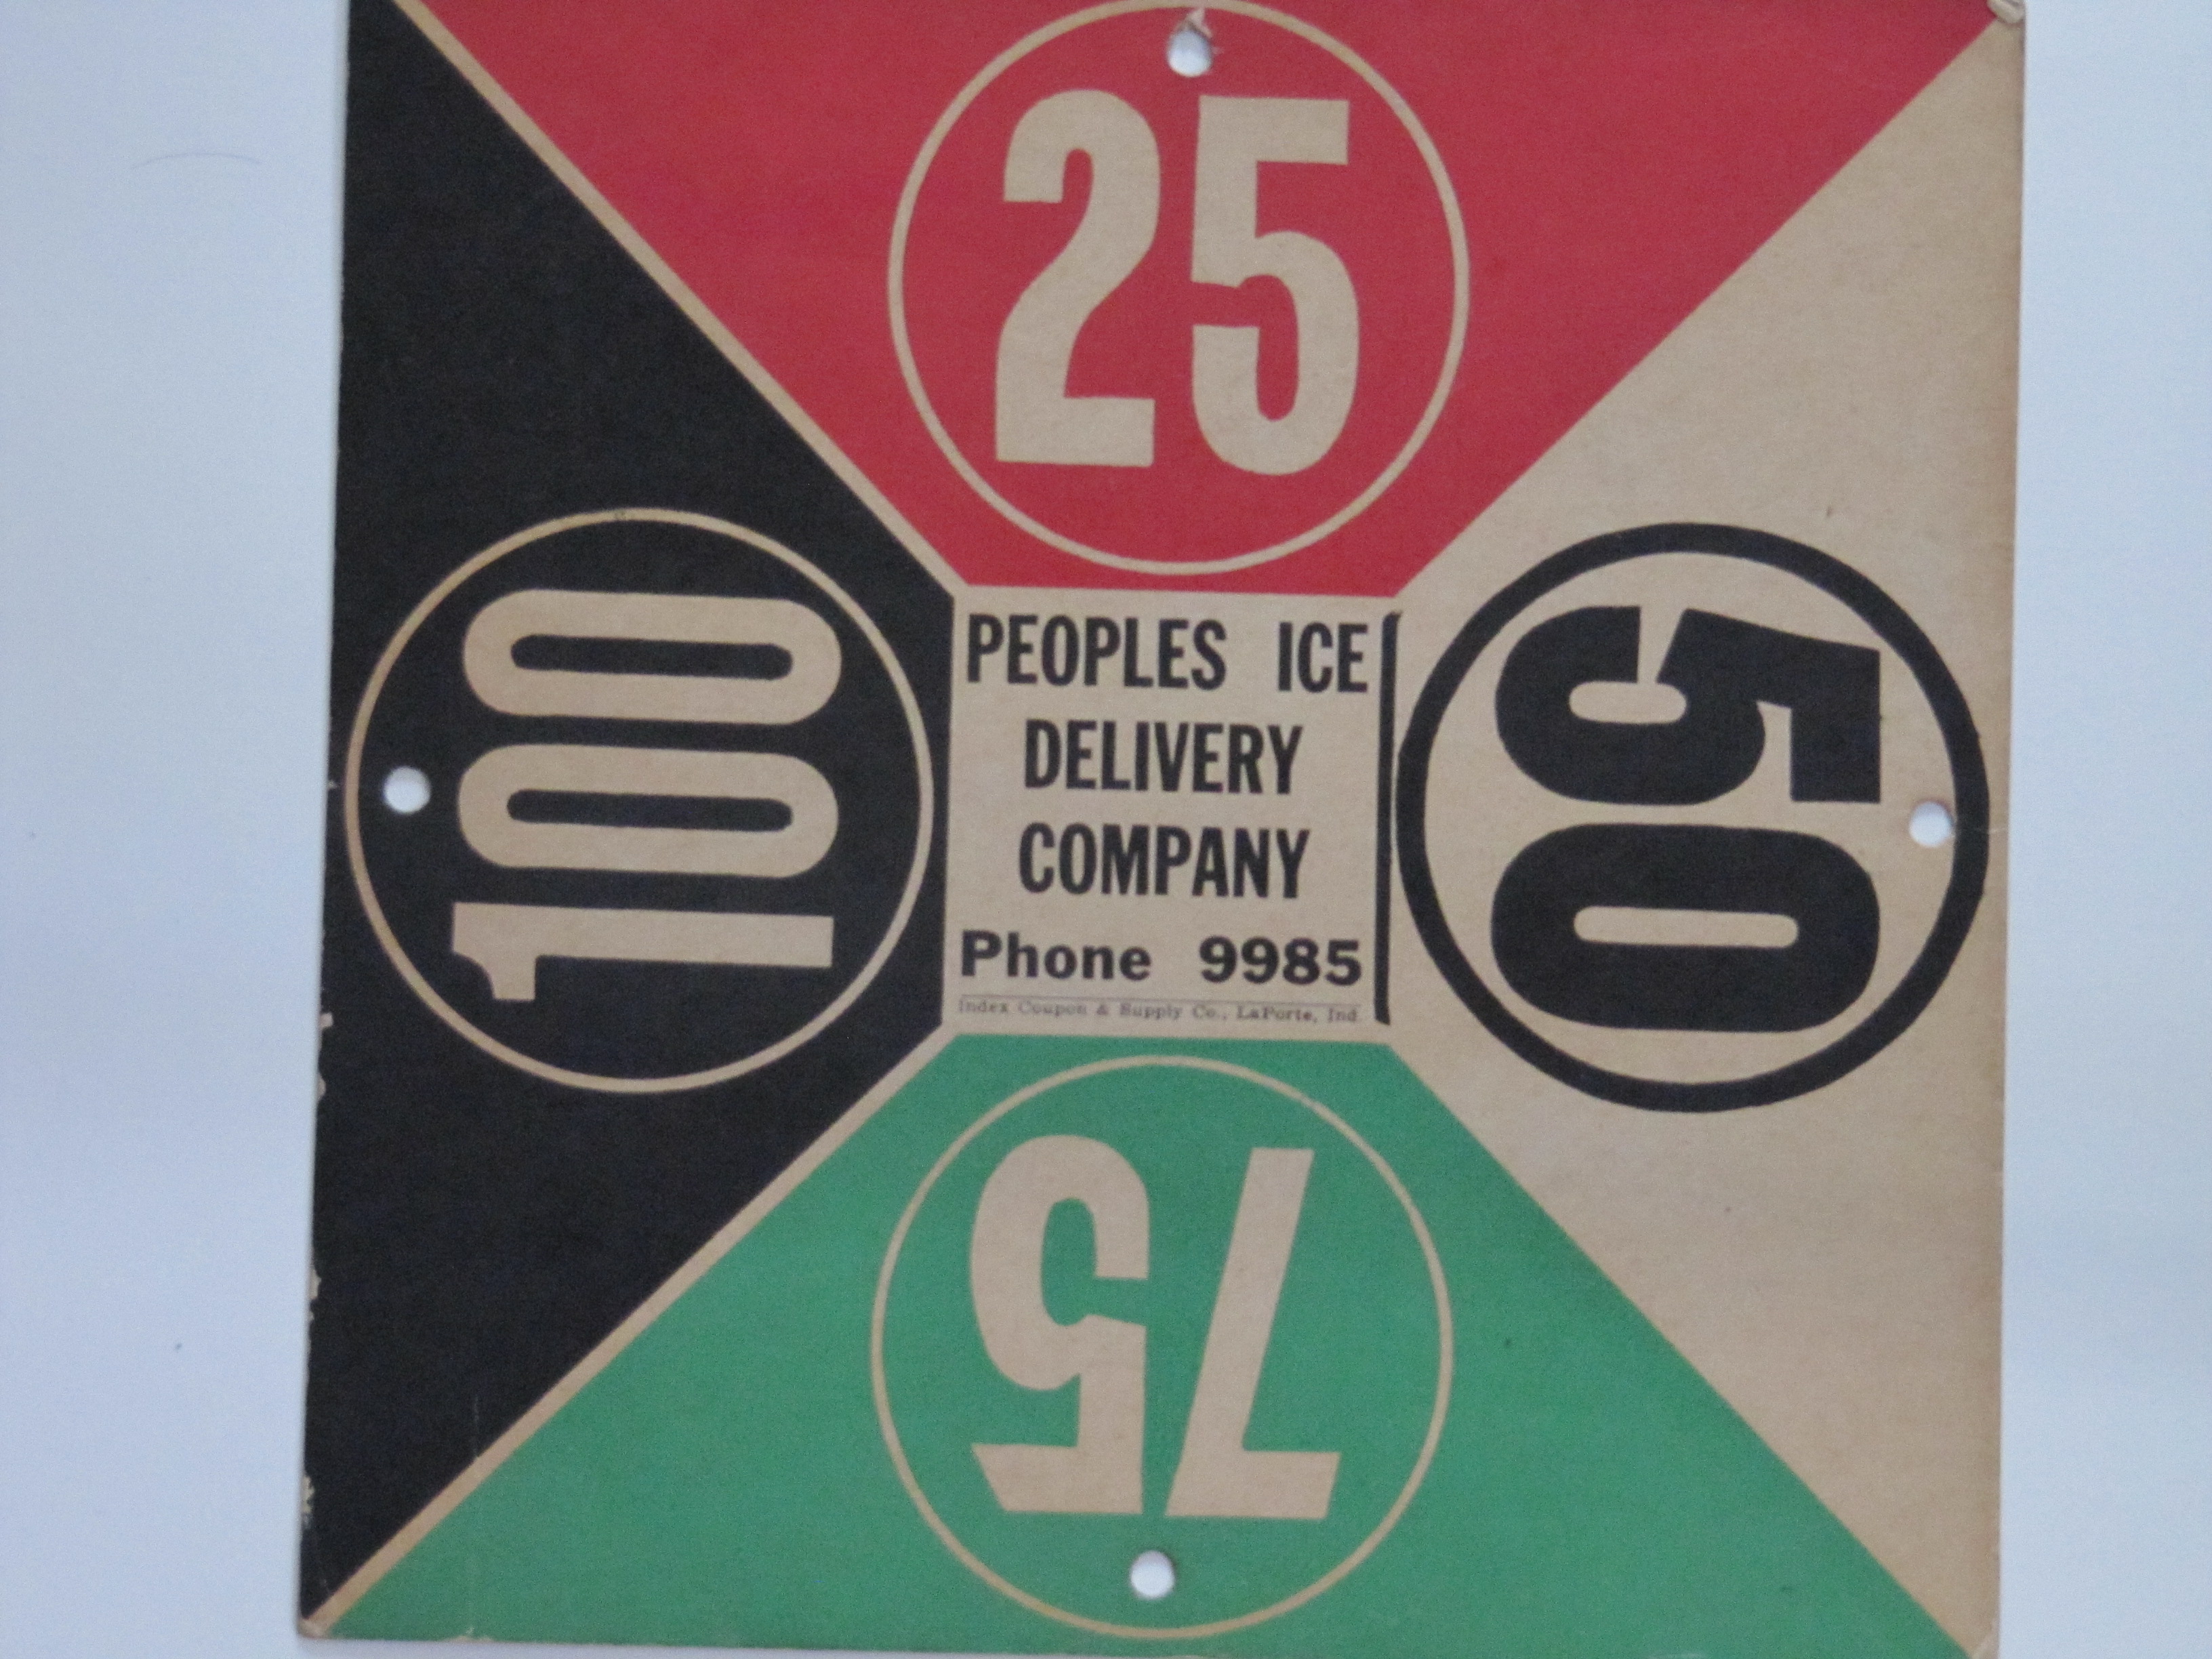 Peoples Ice Delivery Co.